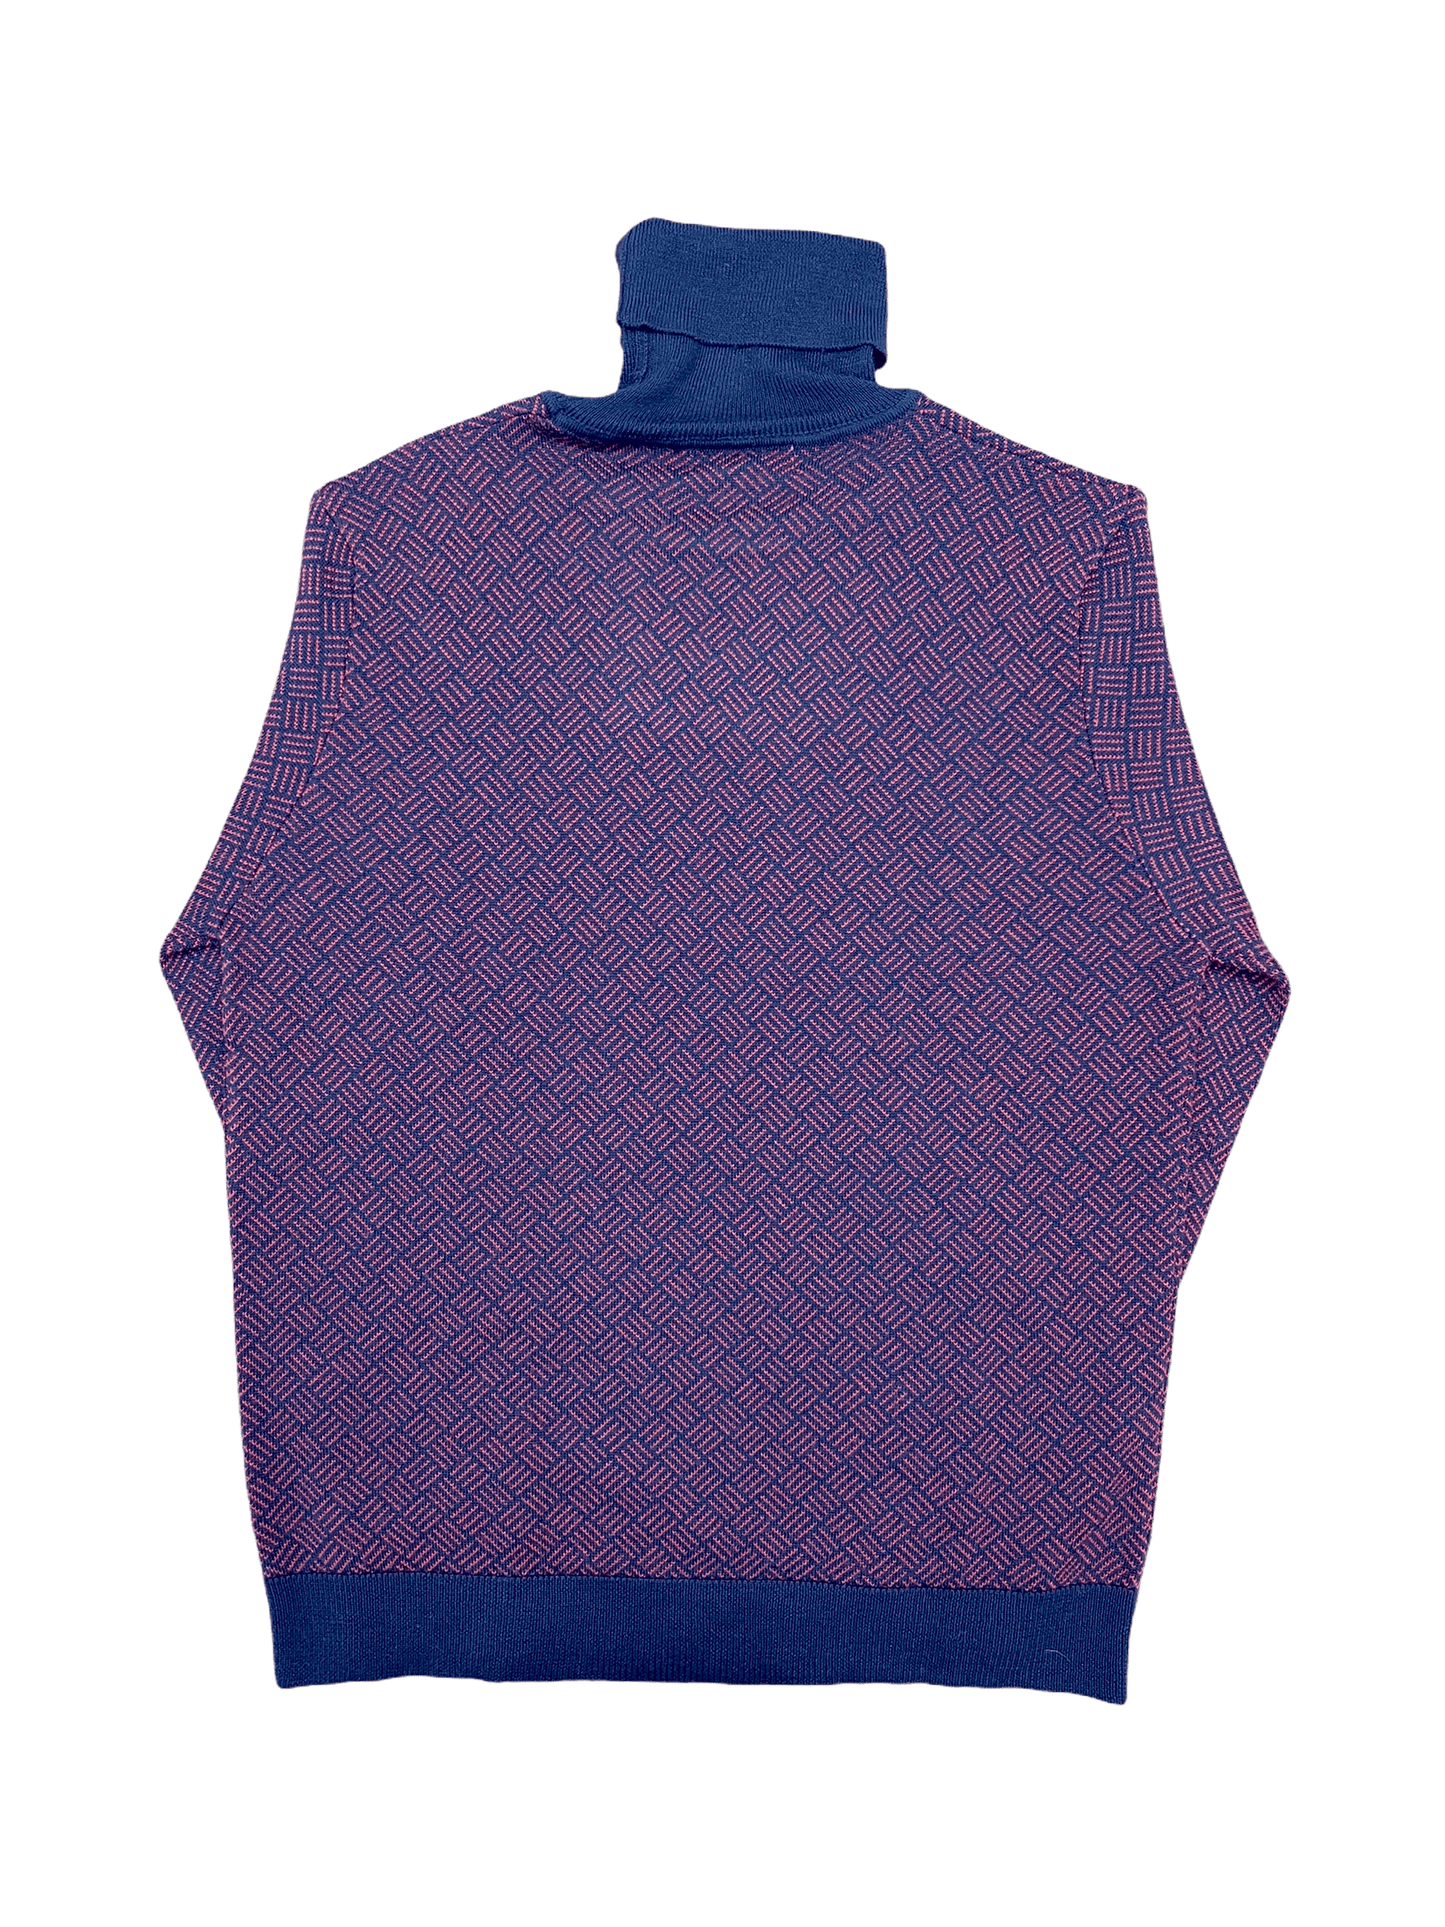 Progetto Uomo Red Blue Wool Turtleneck Large—Genuine Design luxury consignment